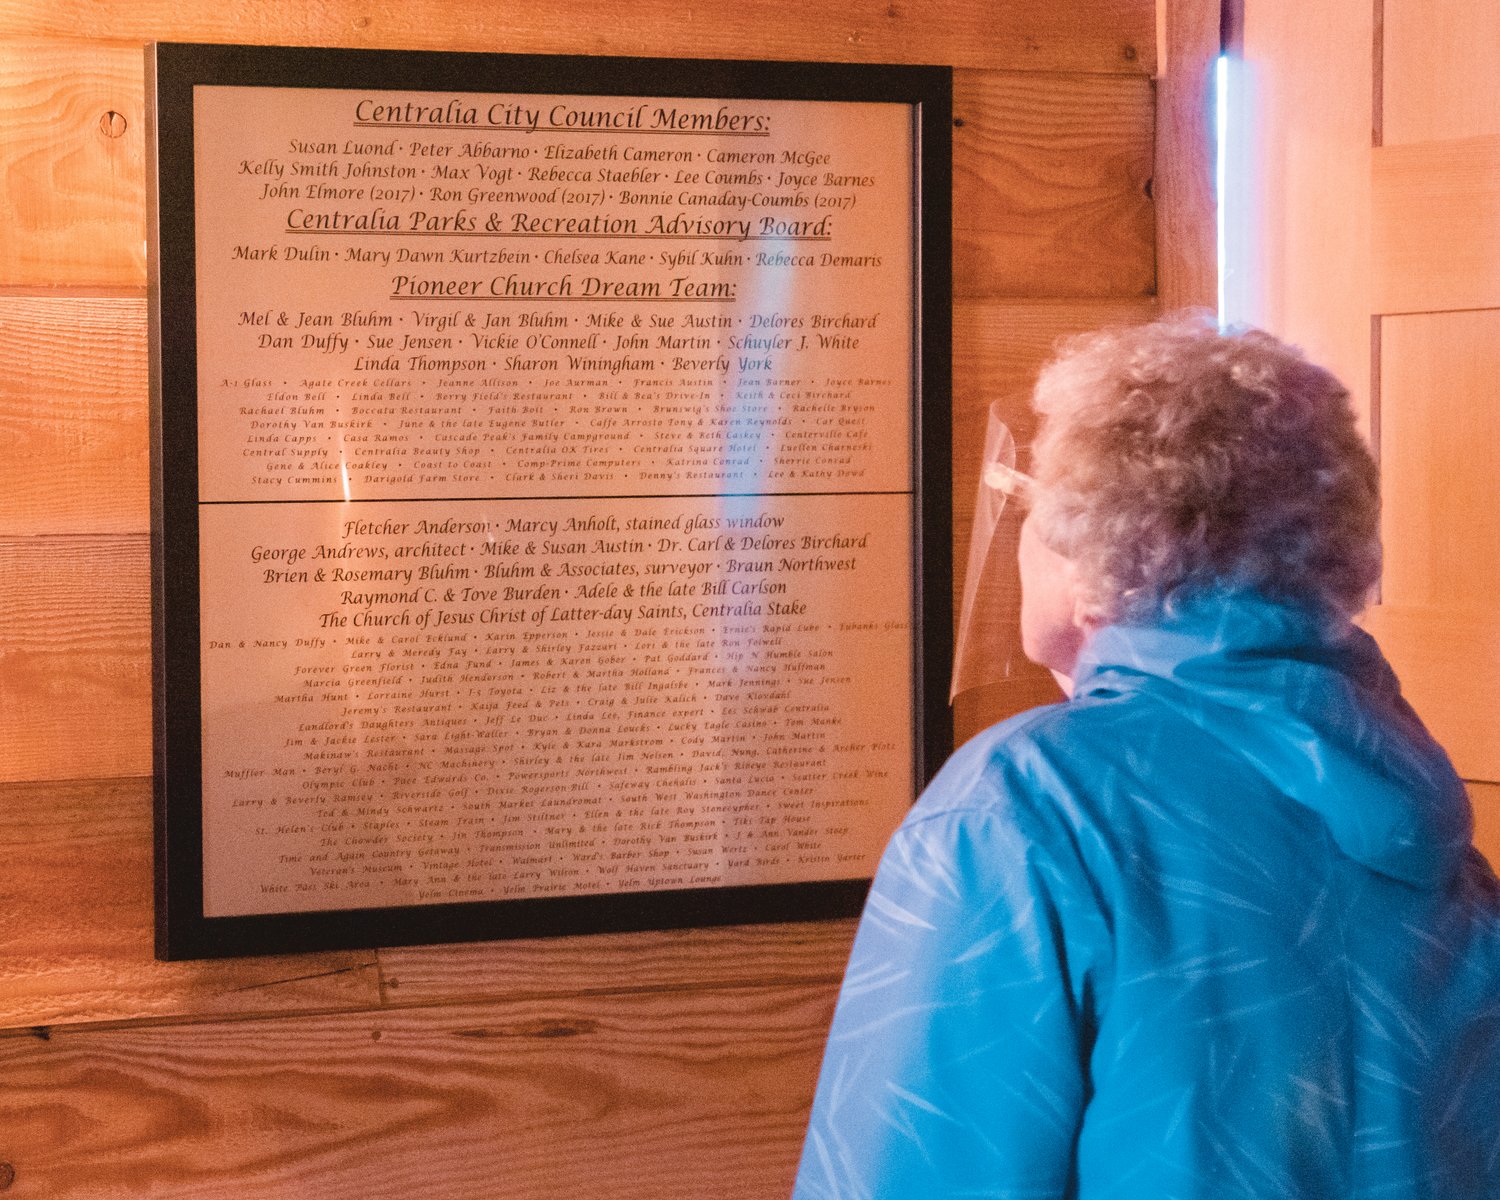 Signage commemorates key players behind the construction and planning for the Borst Park Pioneer Church in Centralia on Saturday.